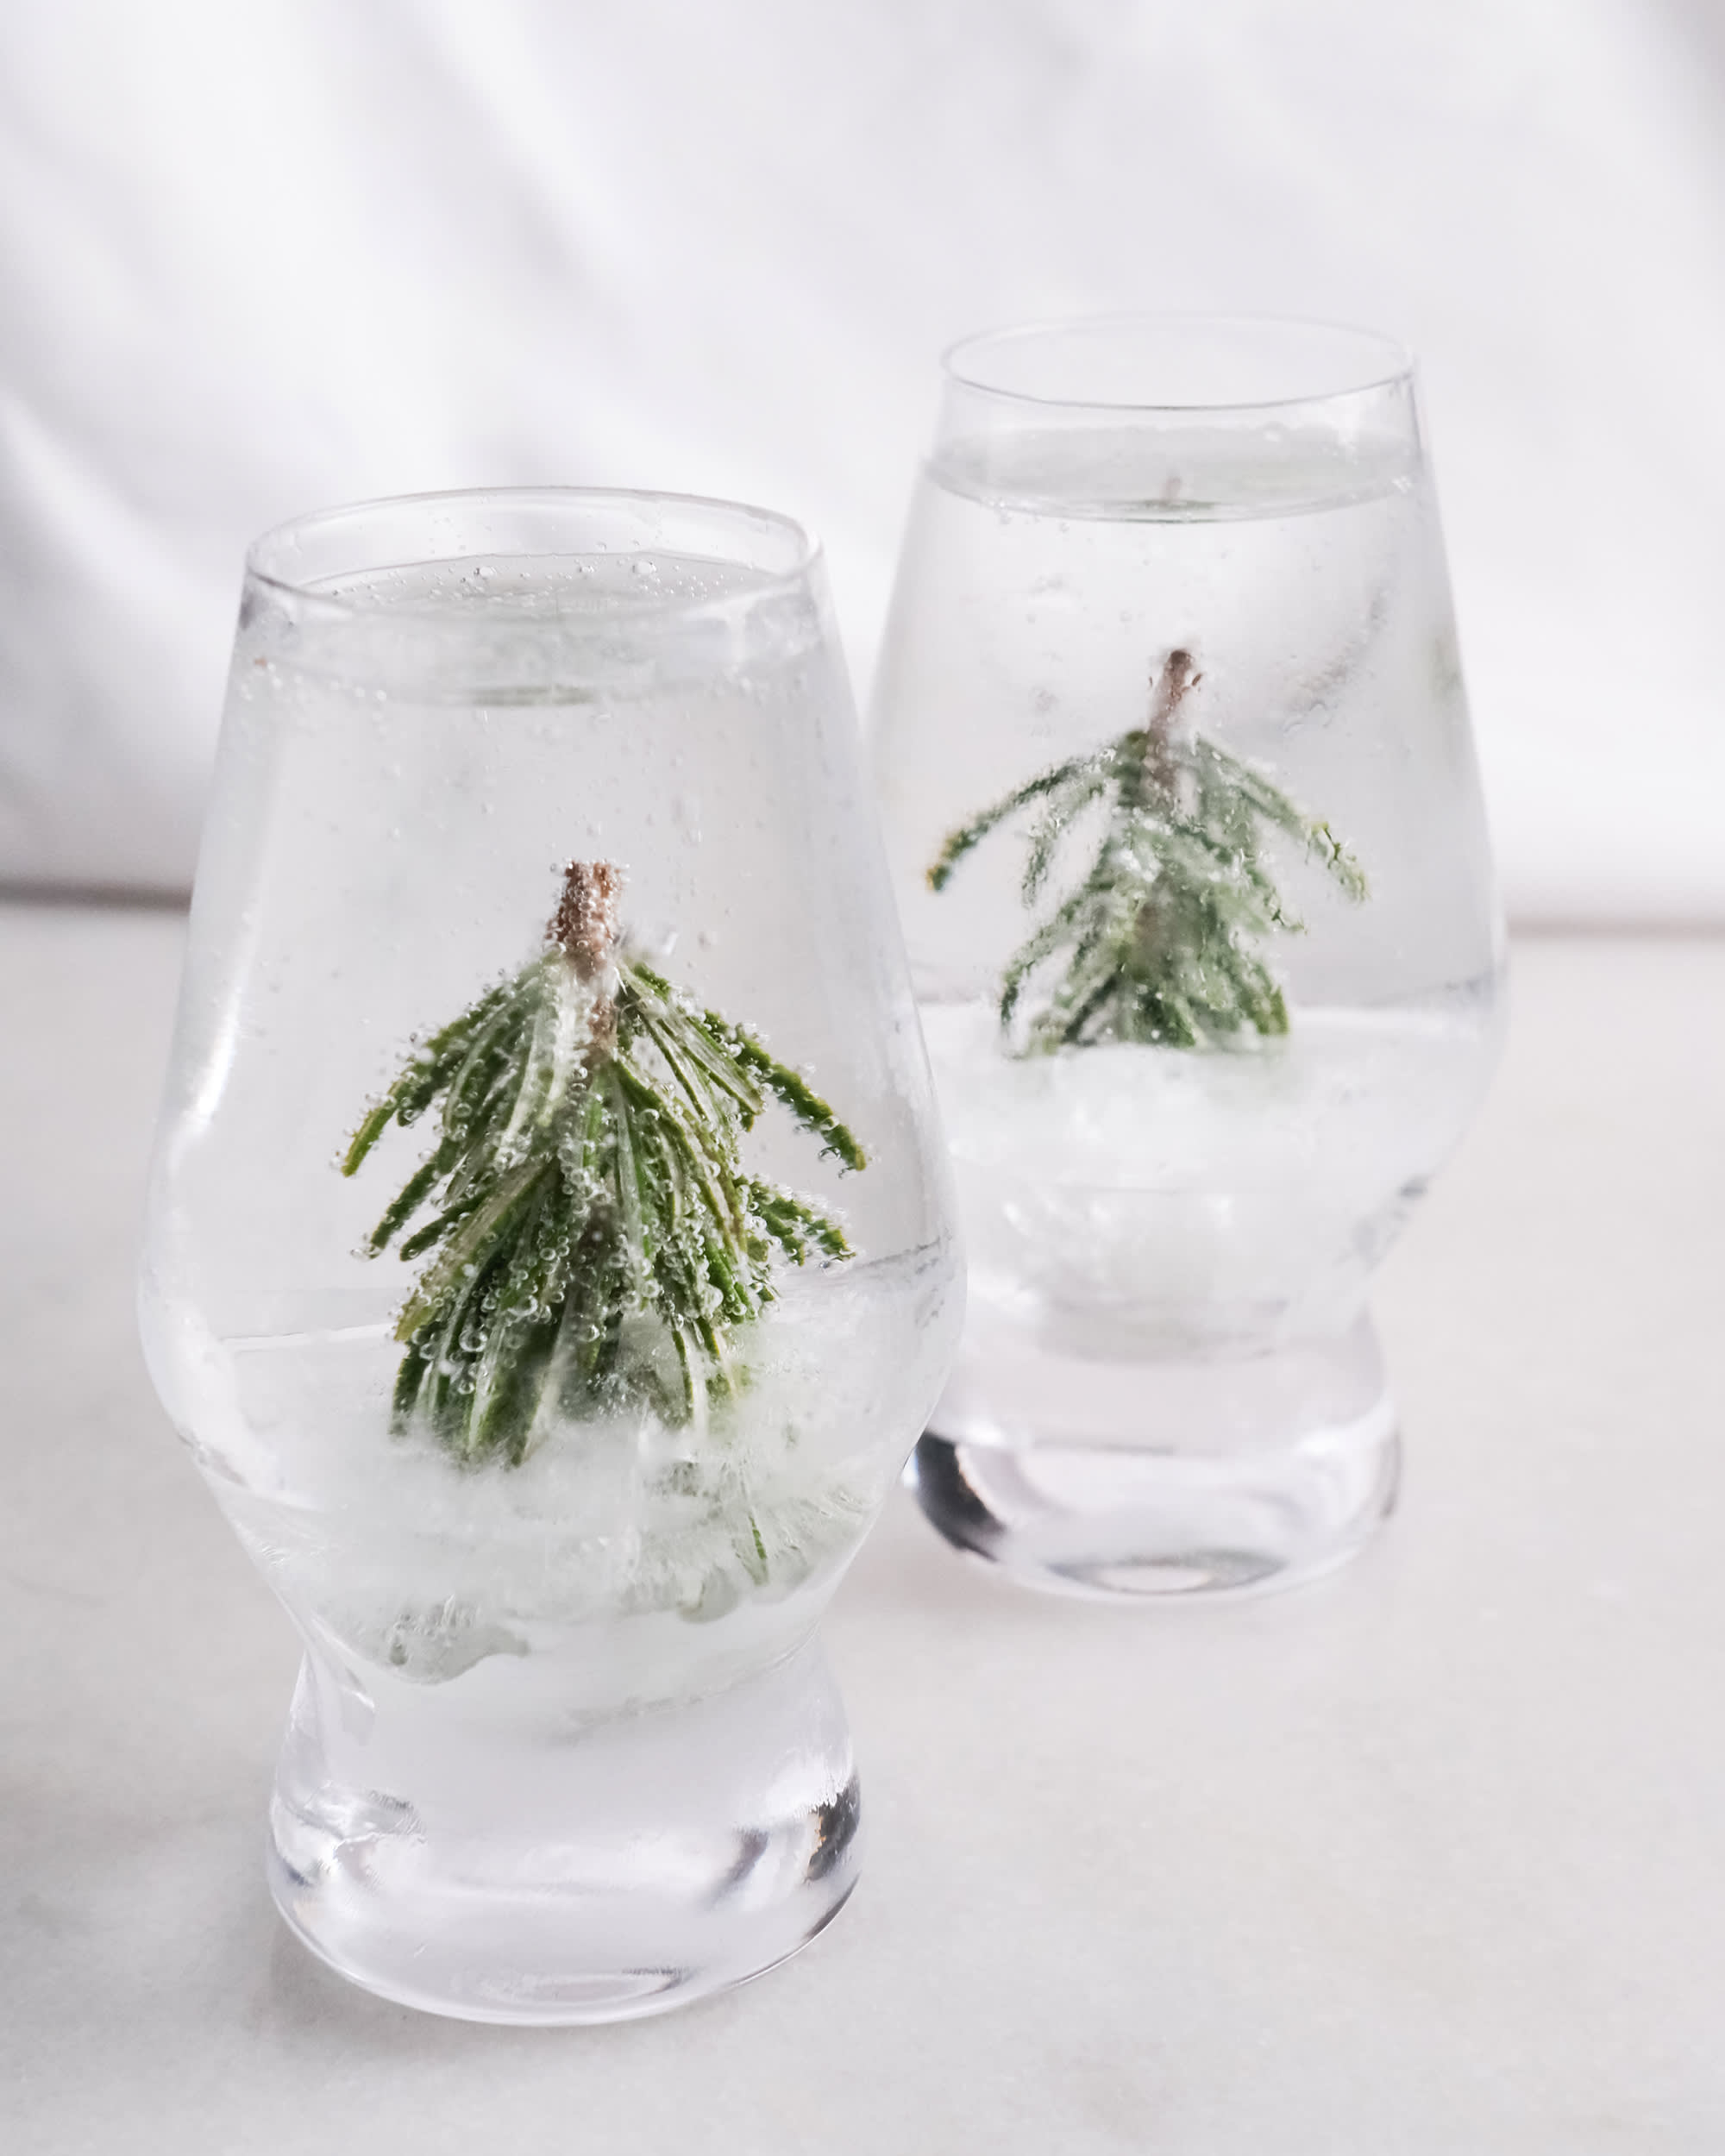 I Tried the Viral Christmas Tree Cocktail Party Trick